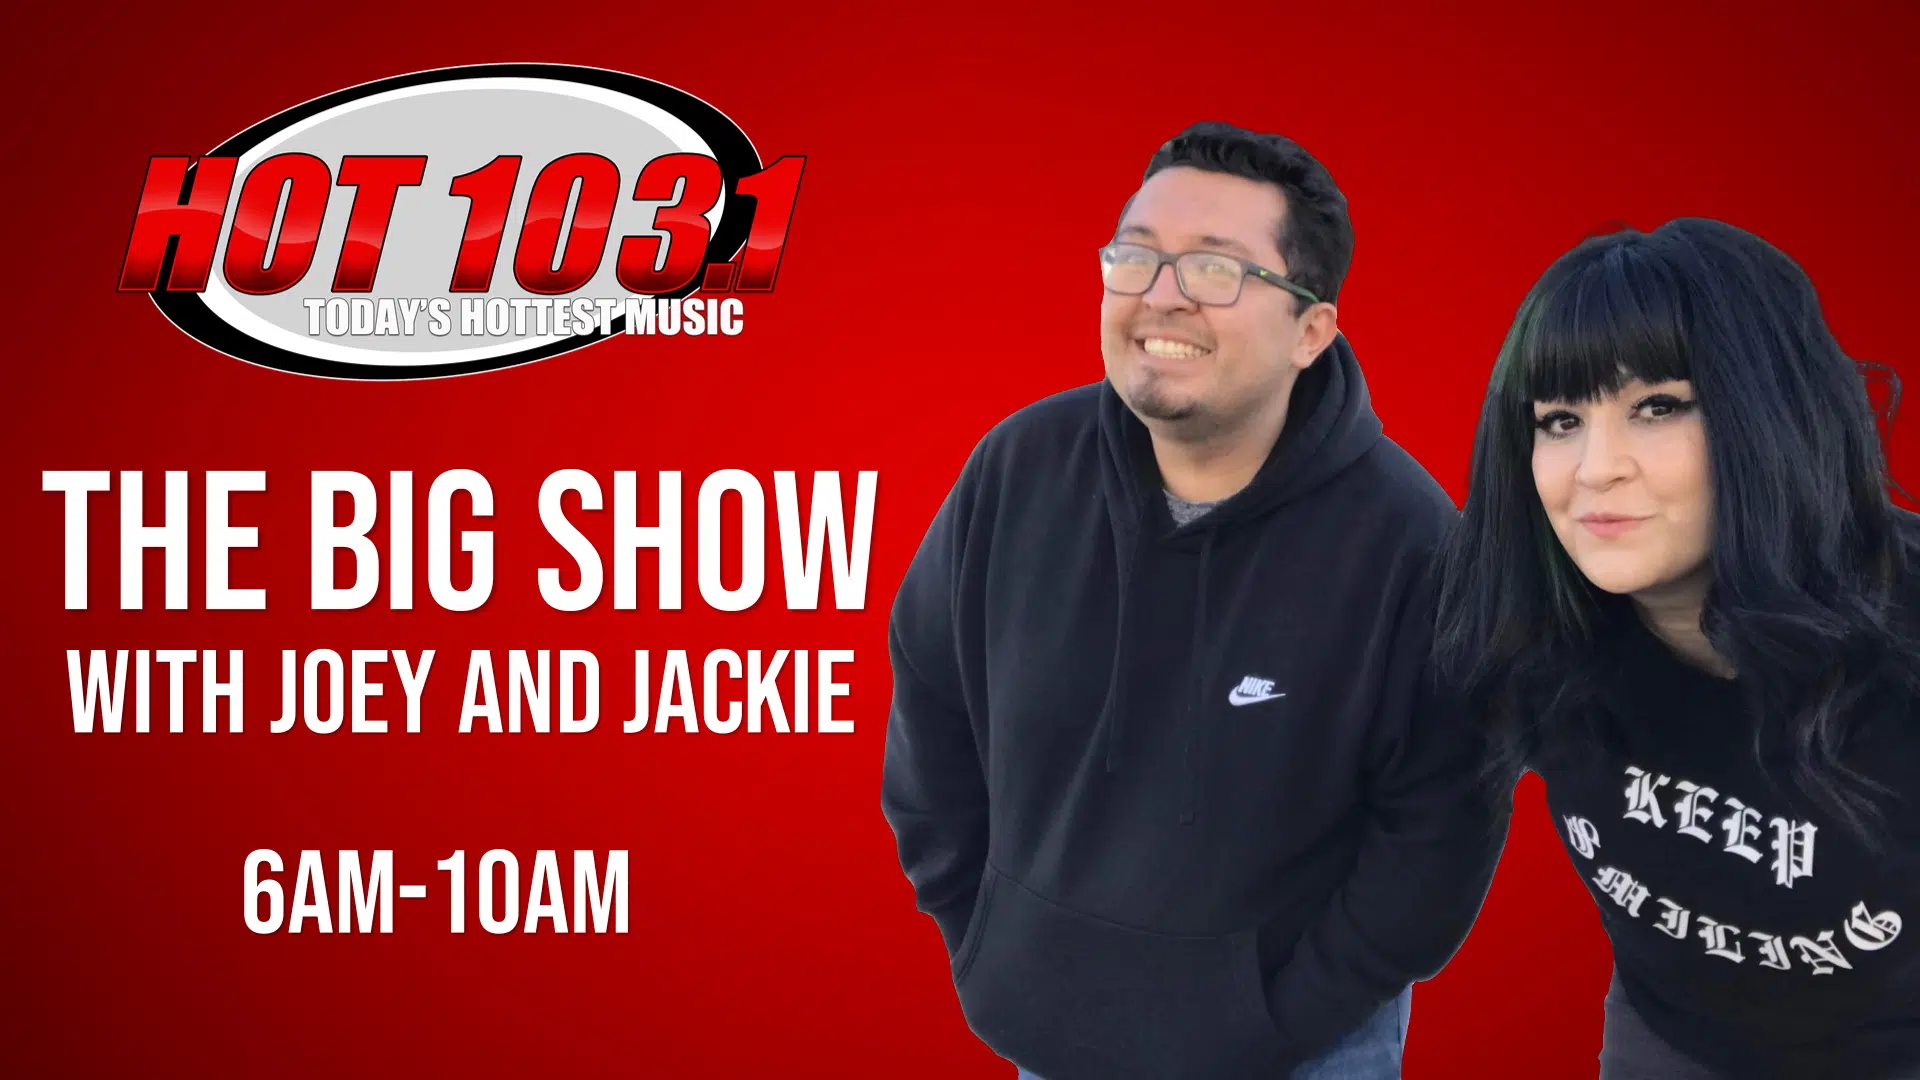 Feature: https://www.hot103.fm/the-big-show-with-joey-jackie/